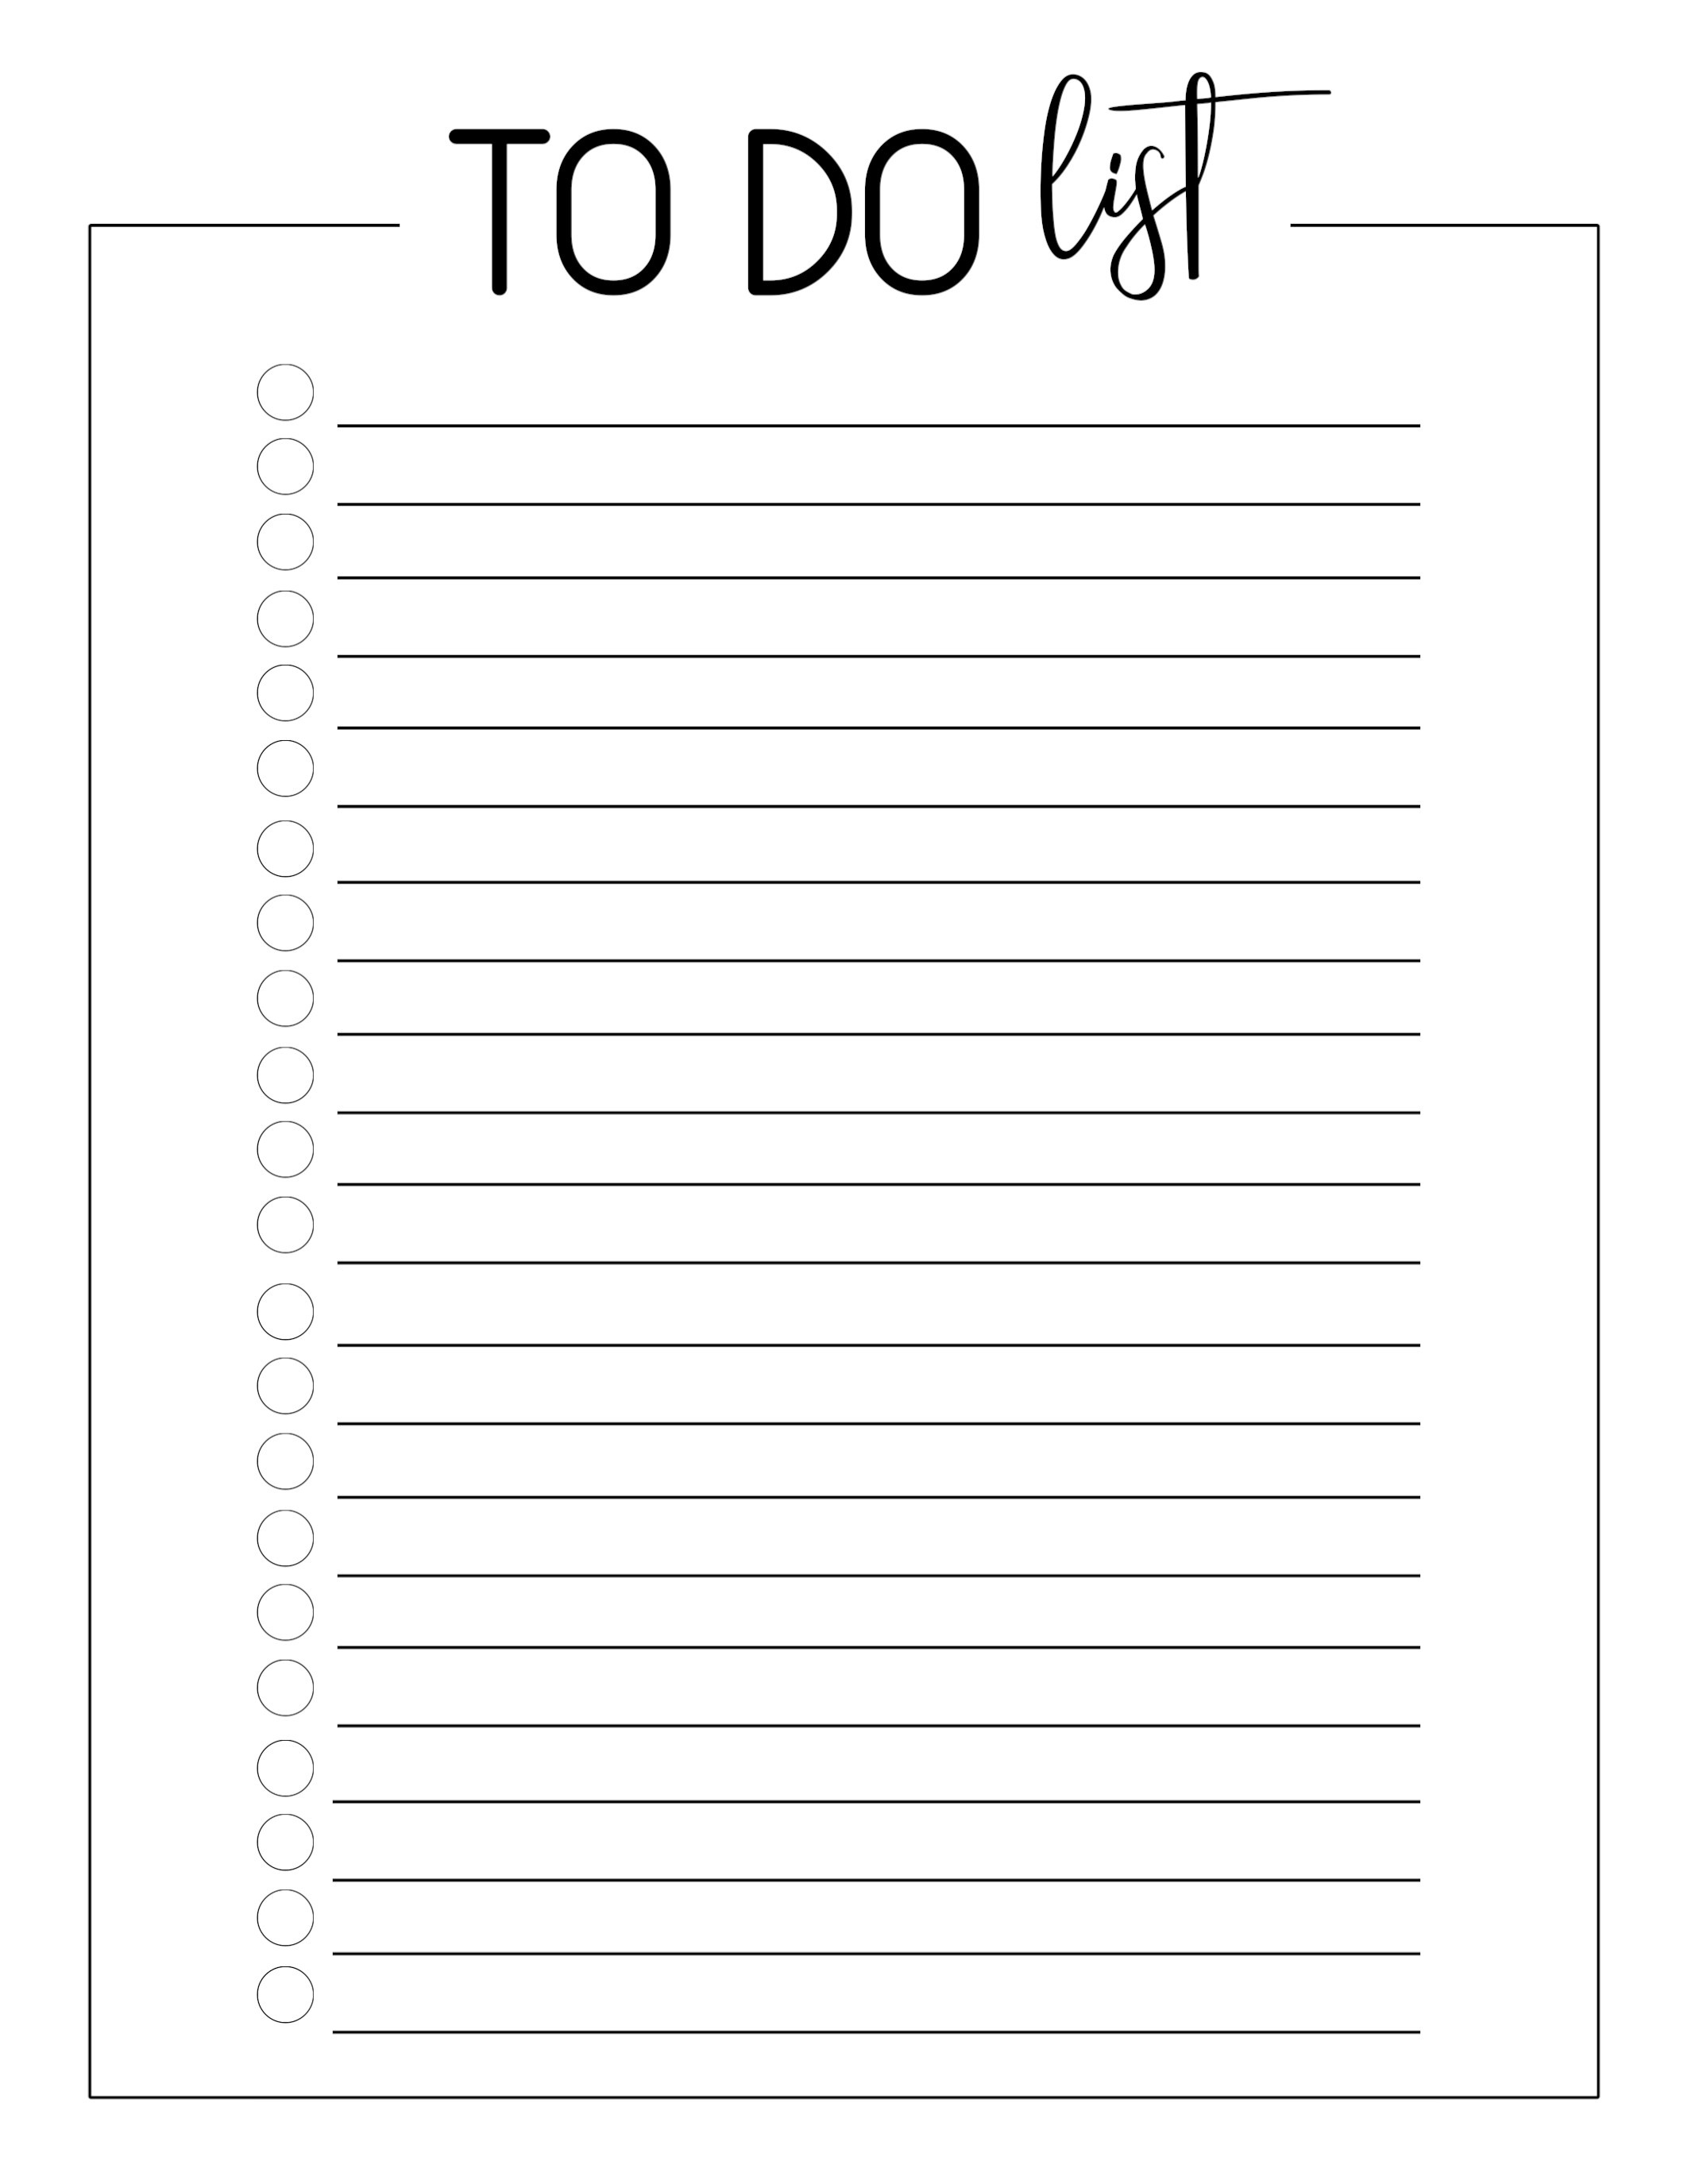 Free Printable To Do Checklist Template - Paper Trail Design - To Do List Free Printable